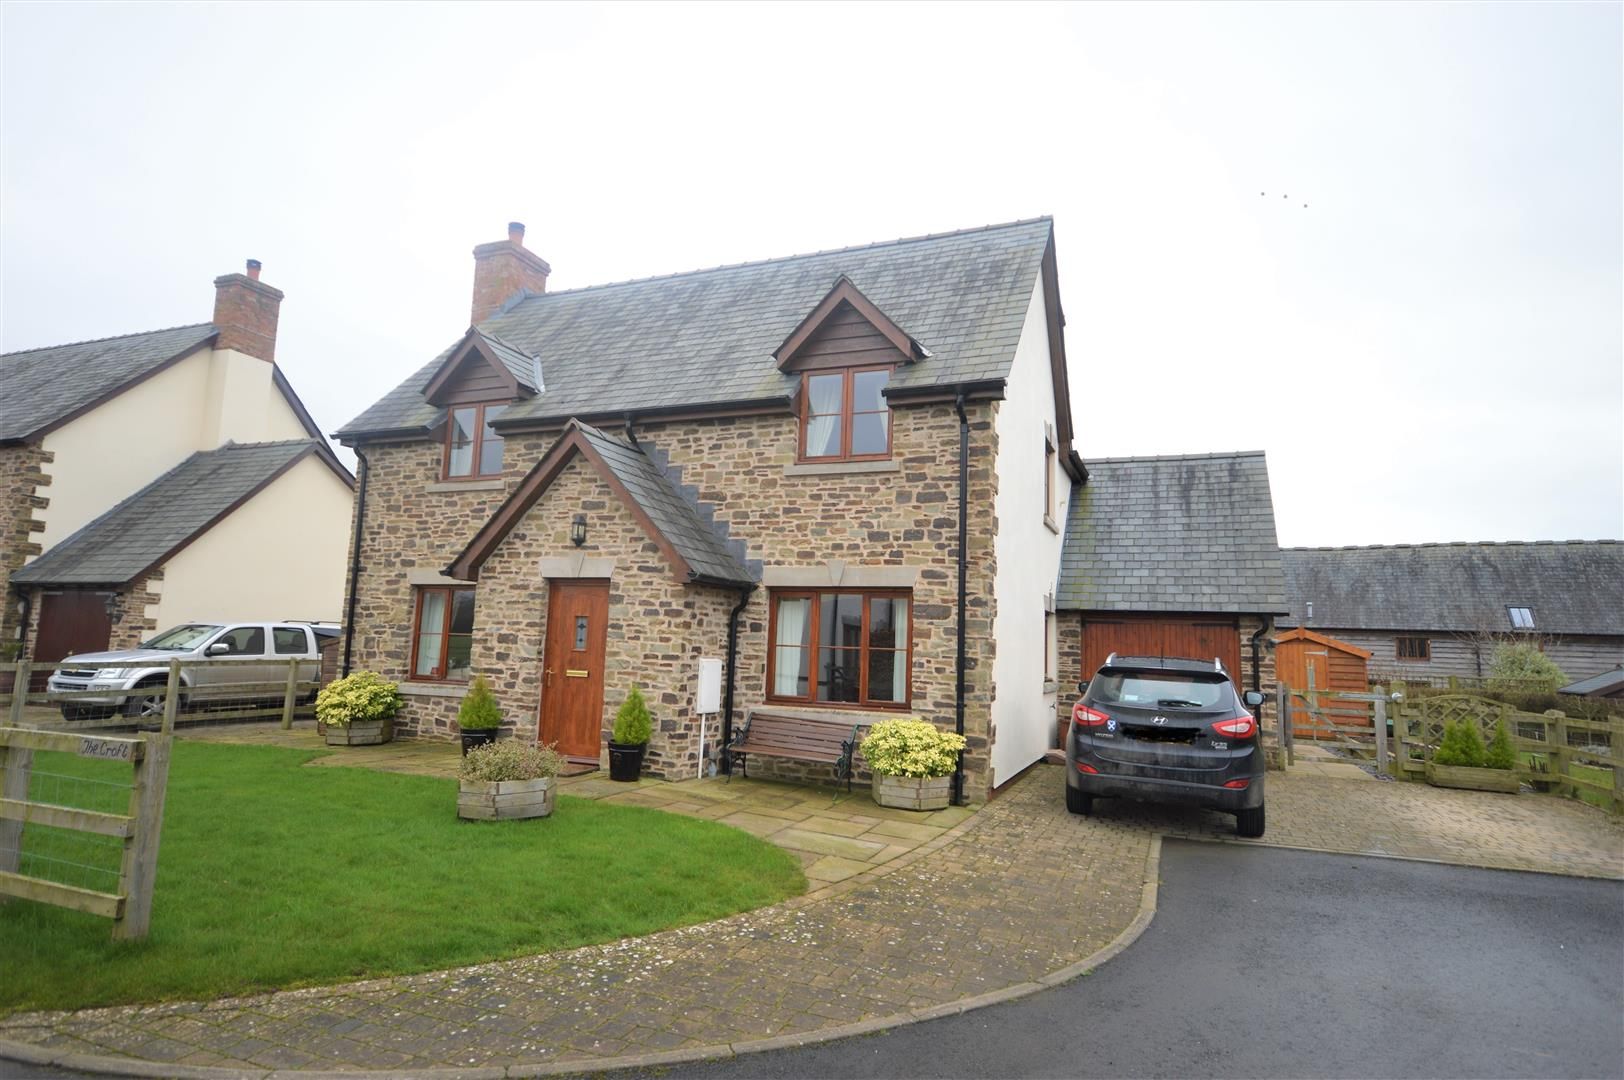 4 bed detached for sale in Eardisley  - Property Image 1